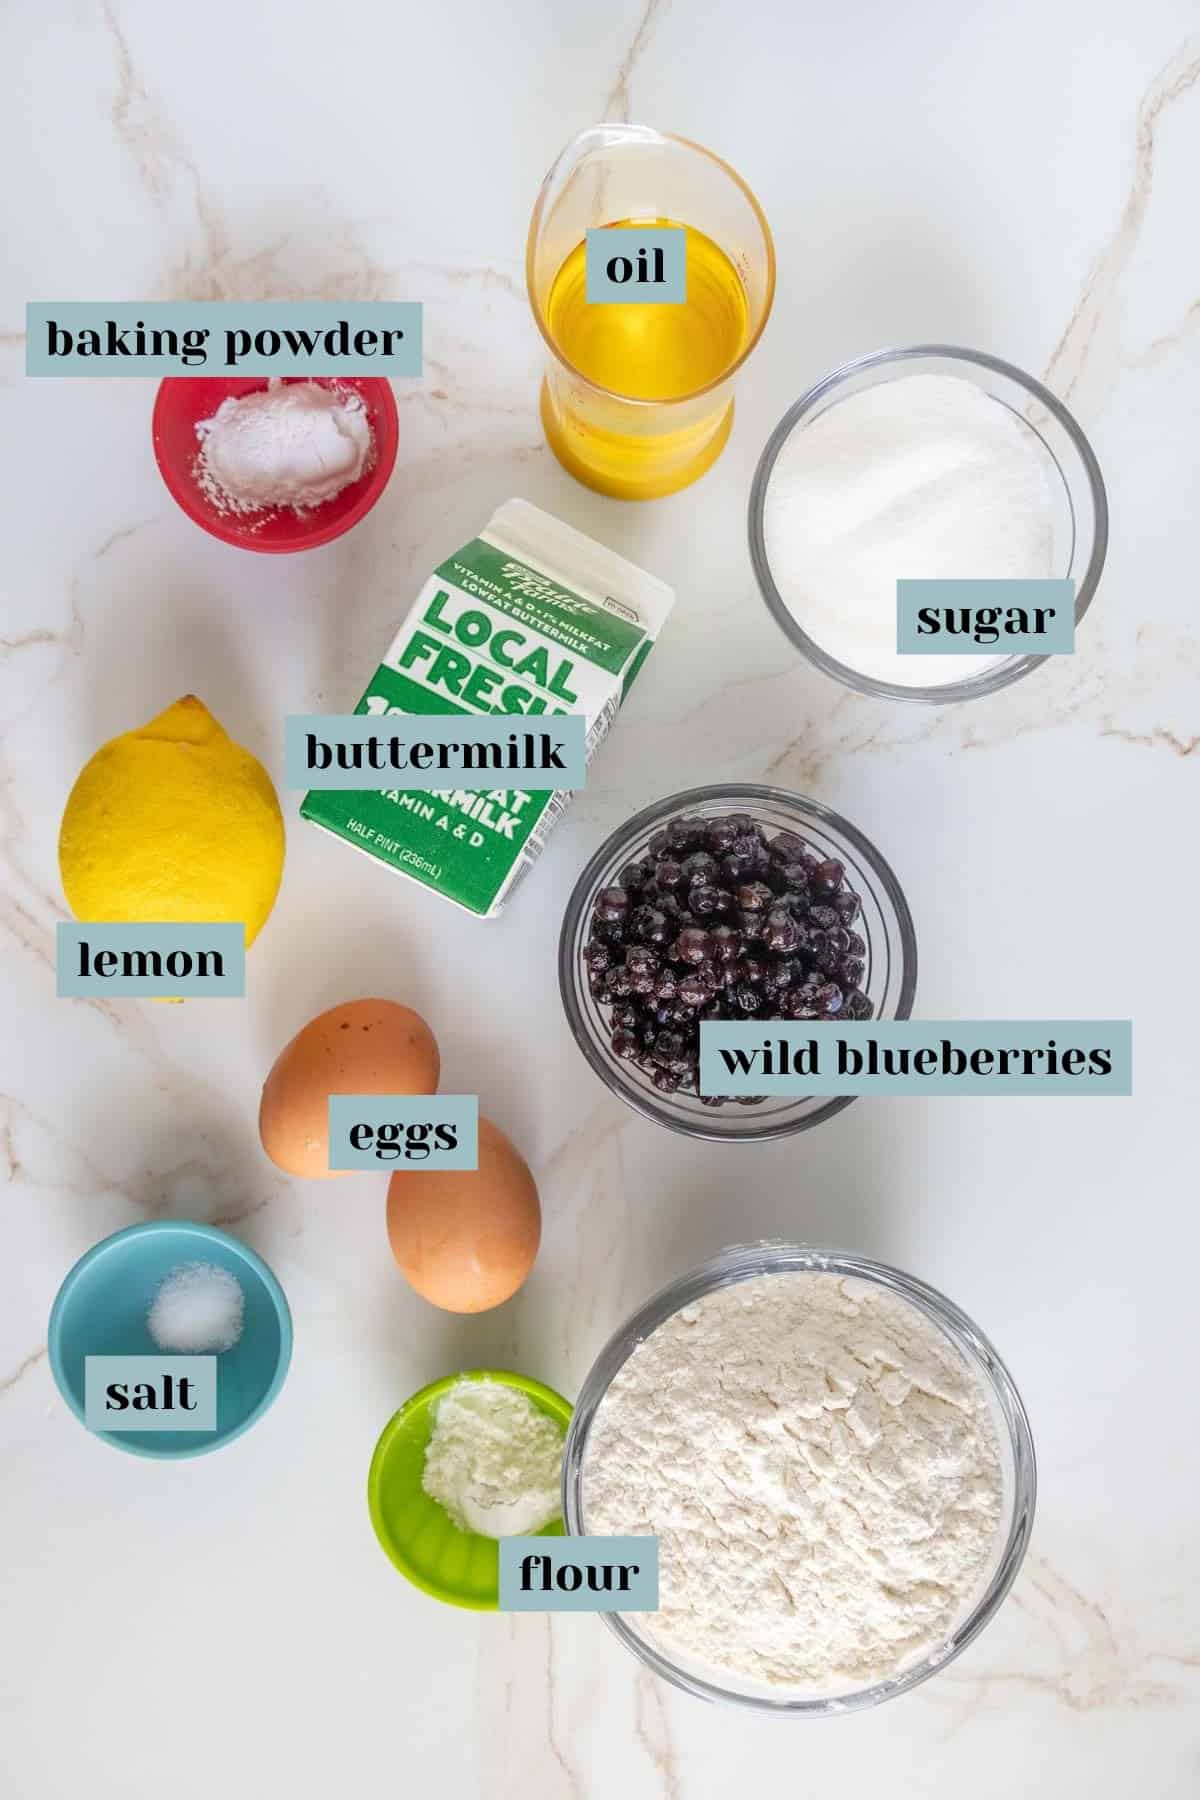 Ingredients for a recipe including baking powder, oil, sugar, buttermilk, wild blueberries, flour, eggs, a lemon, and salt, arranged on a marble surface.